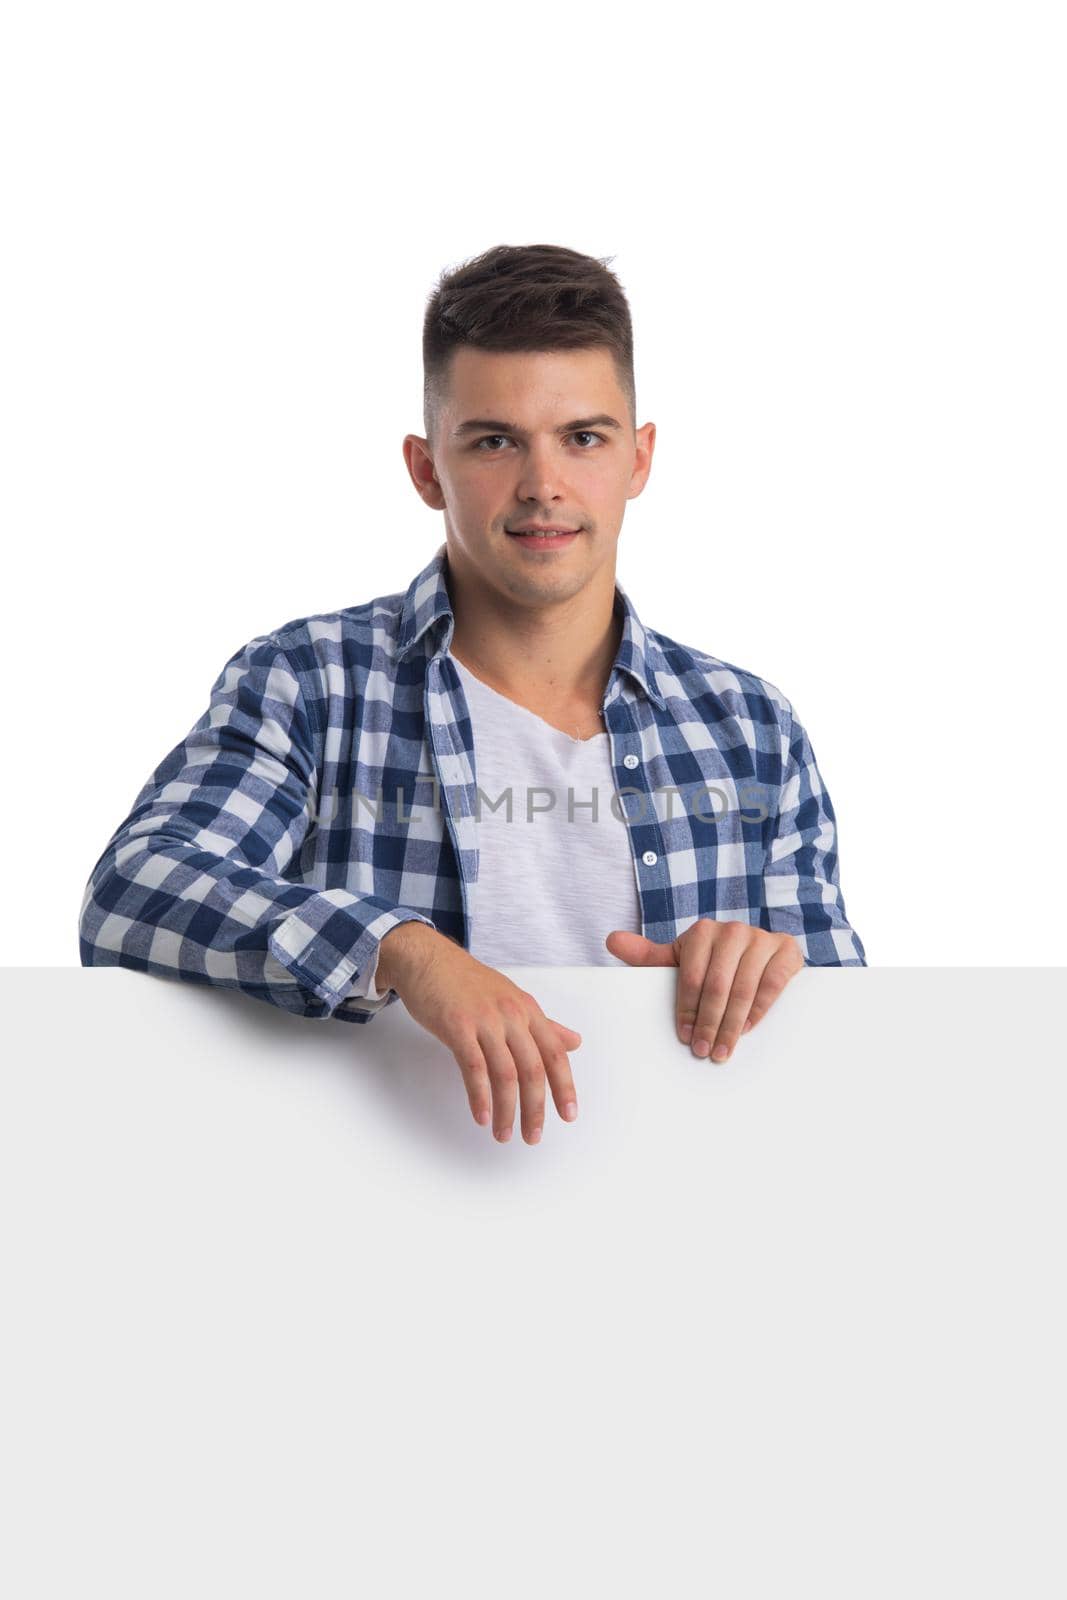 Young happy casual man holsing blank banner isolated on white backgrounf